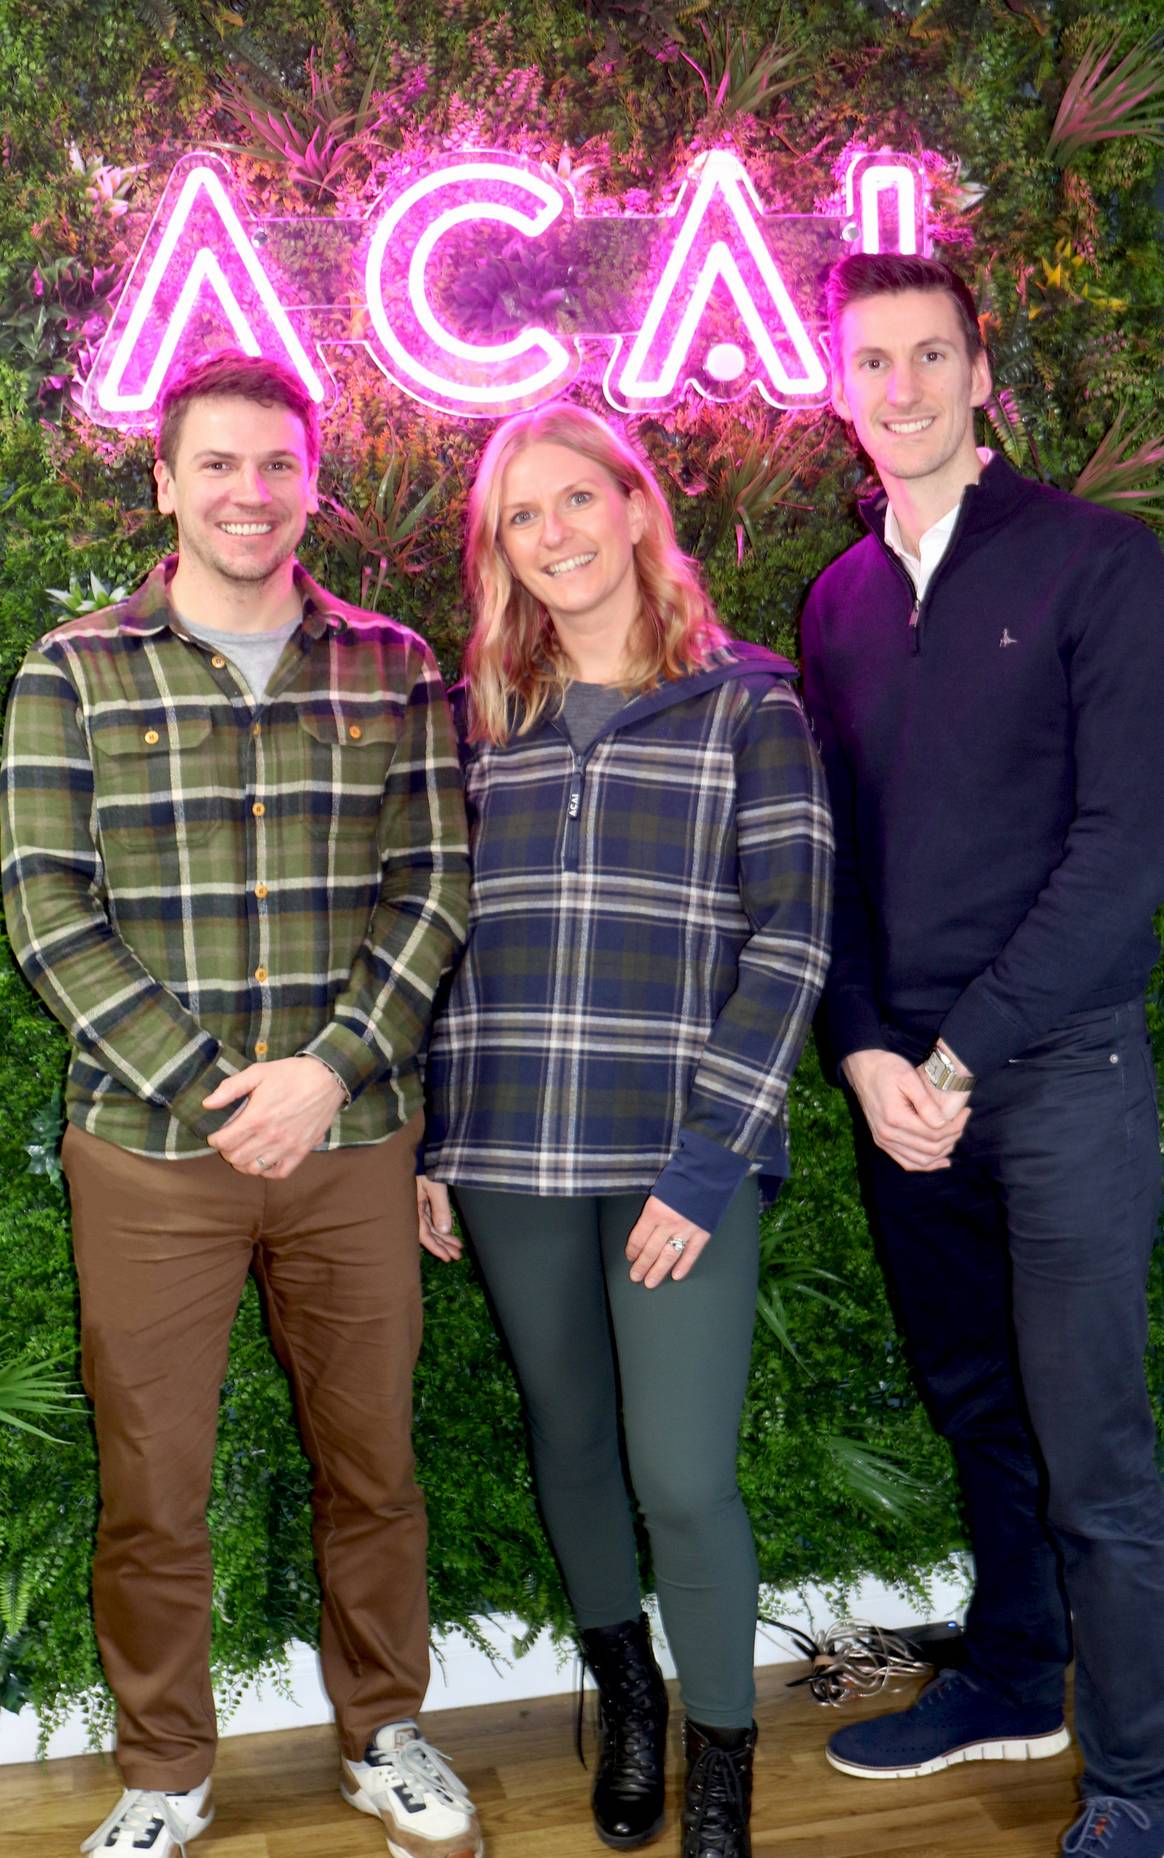 Image: Acai; Acai founders Joe and Kasia Bromley and James Worrall from Growth Partner